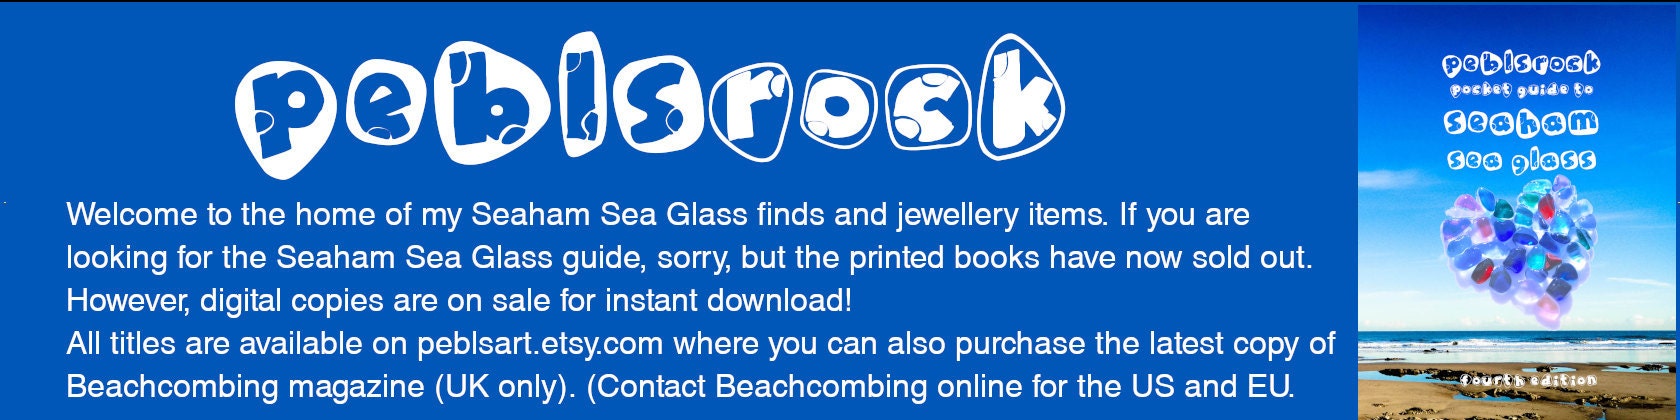 What is sea glass - discovery Seaham beach sea glass